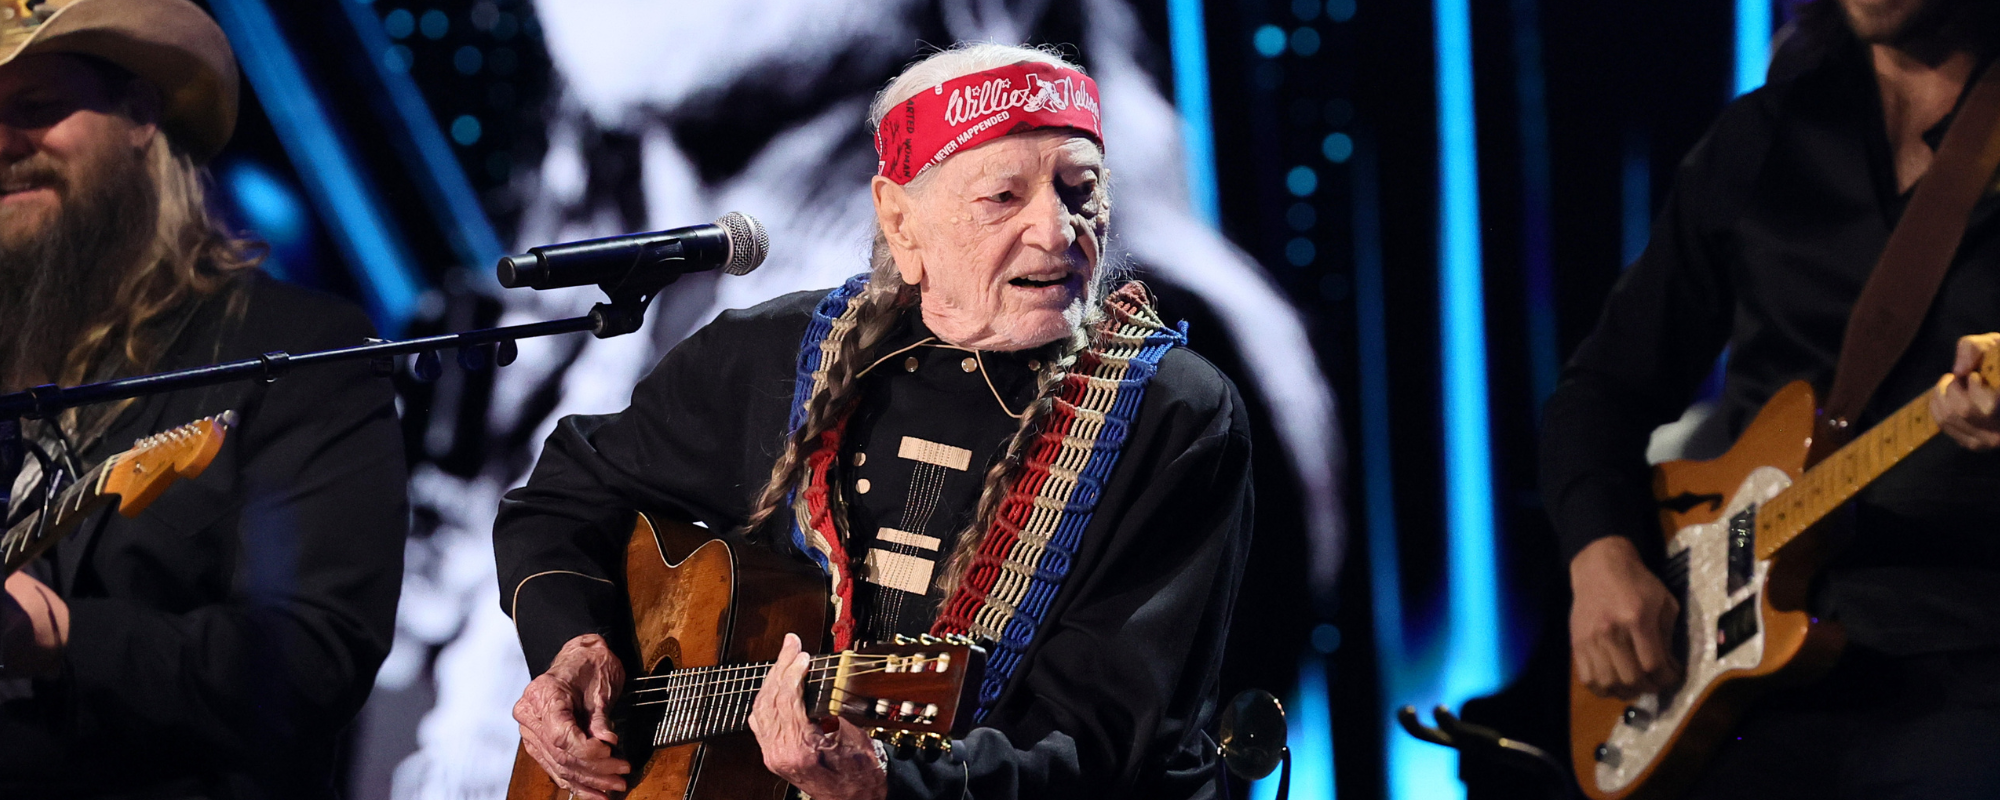 The Meaning Behind Willie Nelson’s Irreverent Anthem “Roll Me Up”